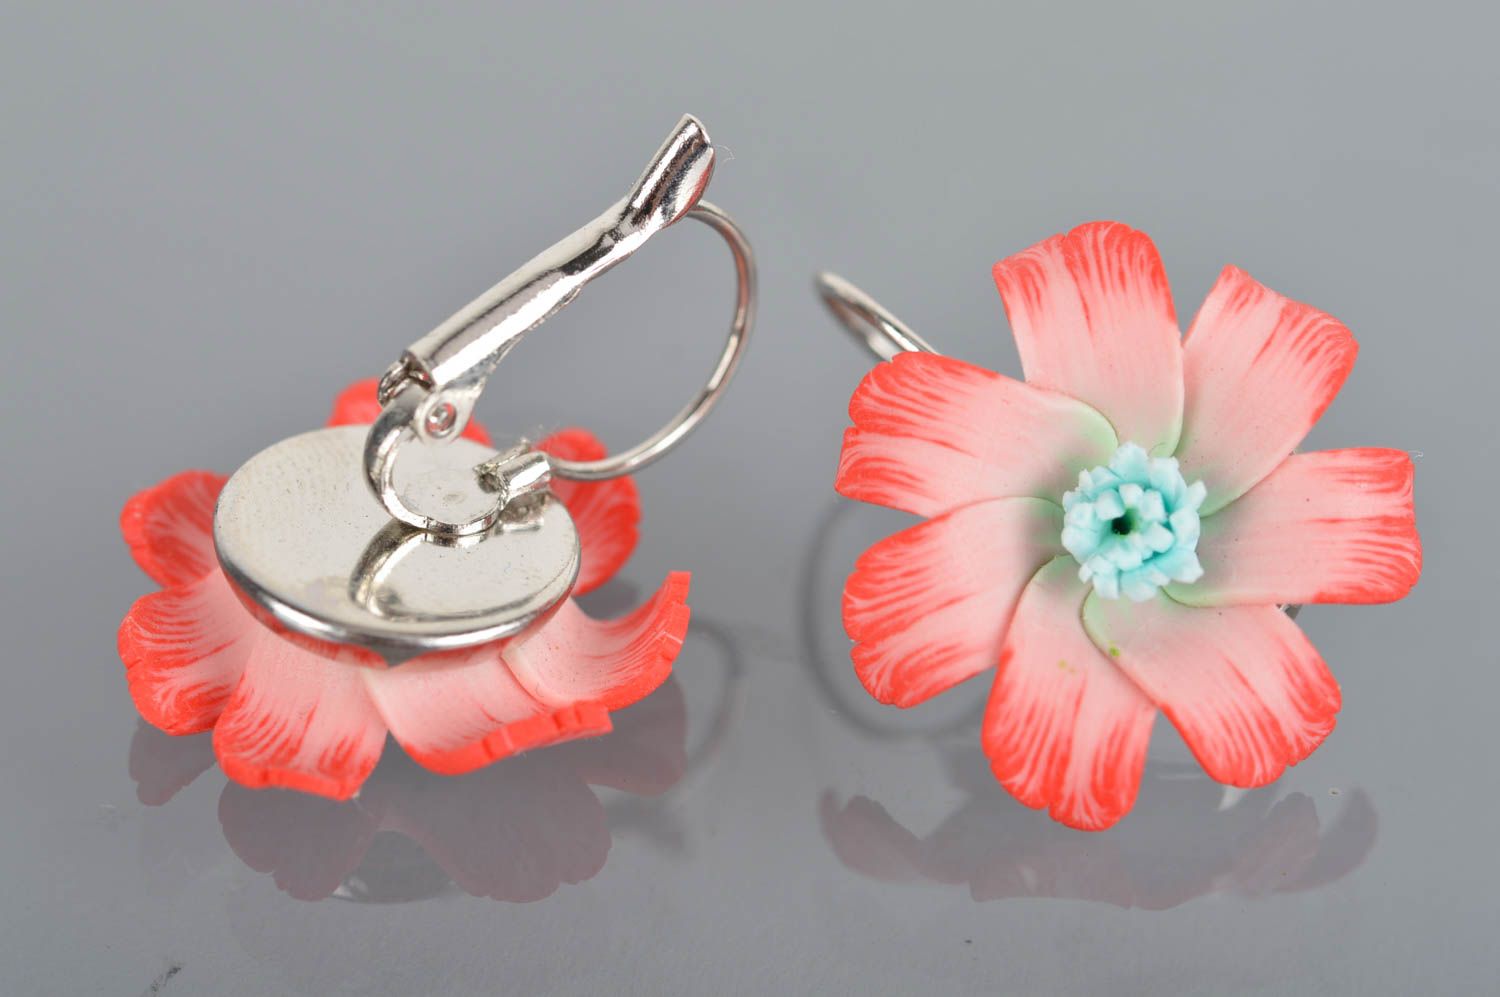 Flower earrings made of polymer clay with pink flowers designer accessory photo 5